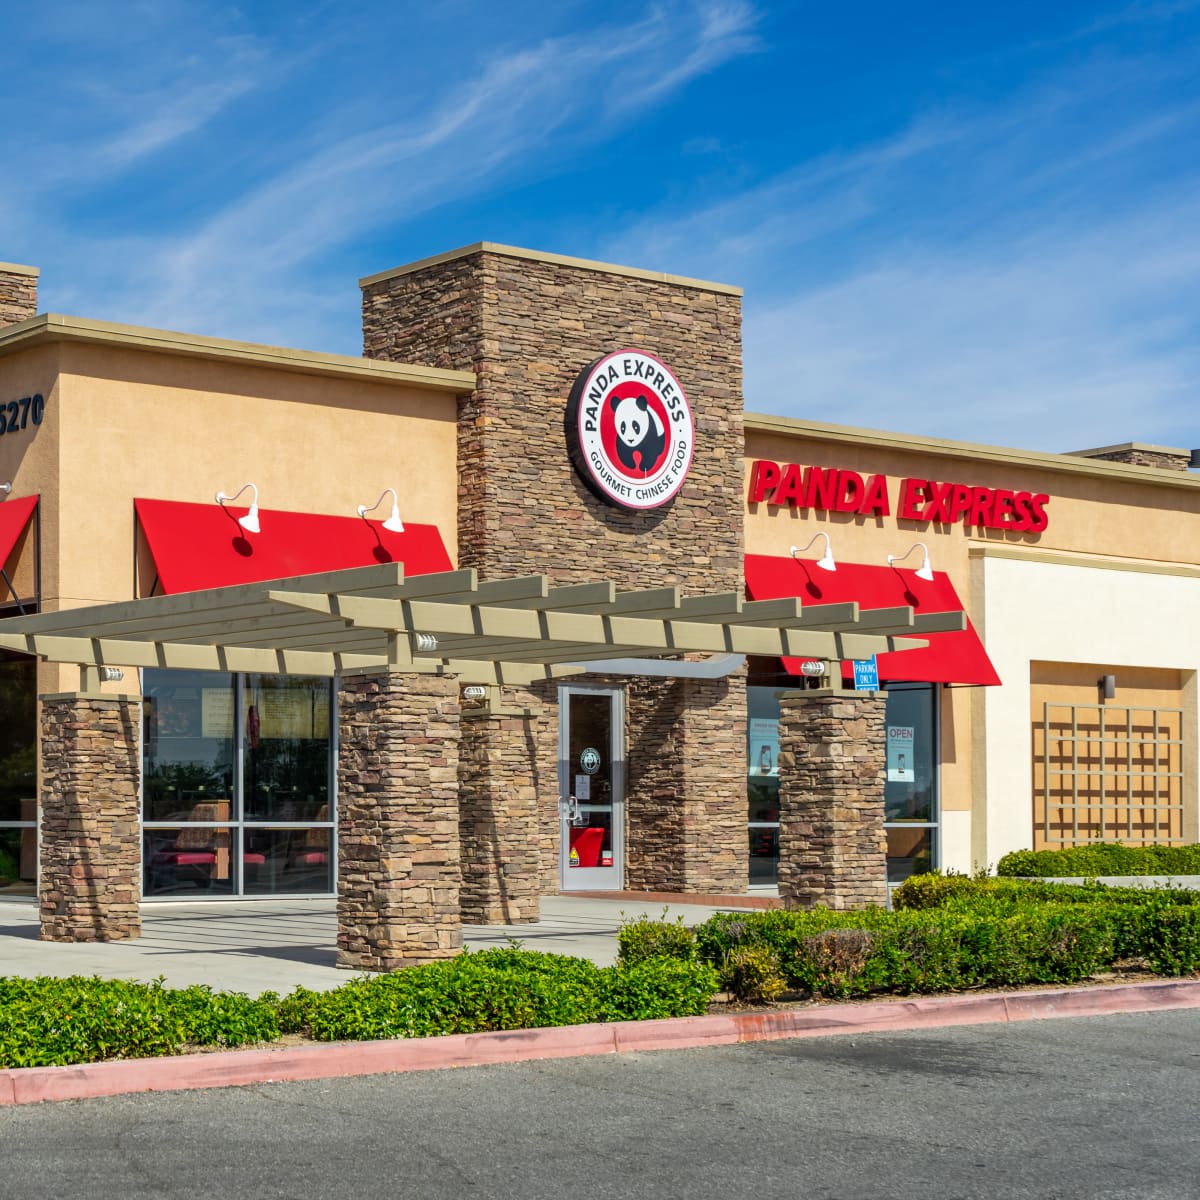 Panda Express Adds 'Sizzling' New Menu Item That Packs a Serious Punch -  Delishably News